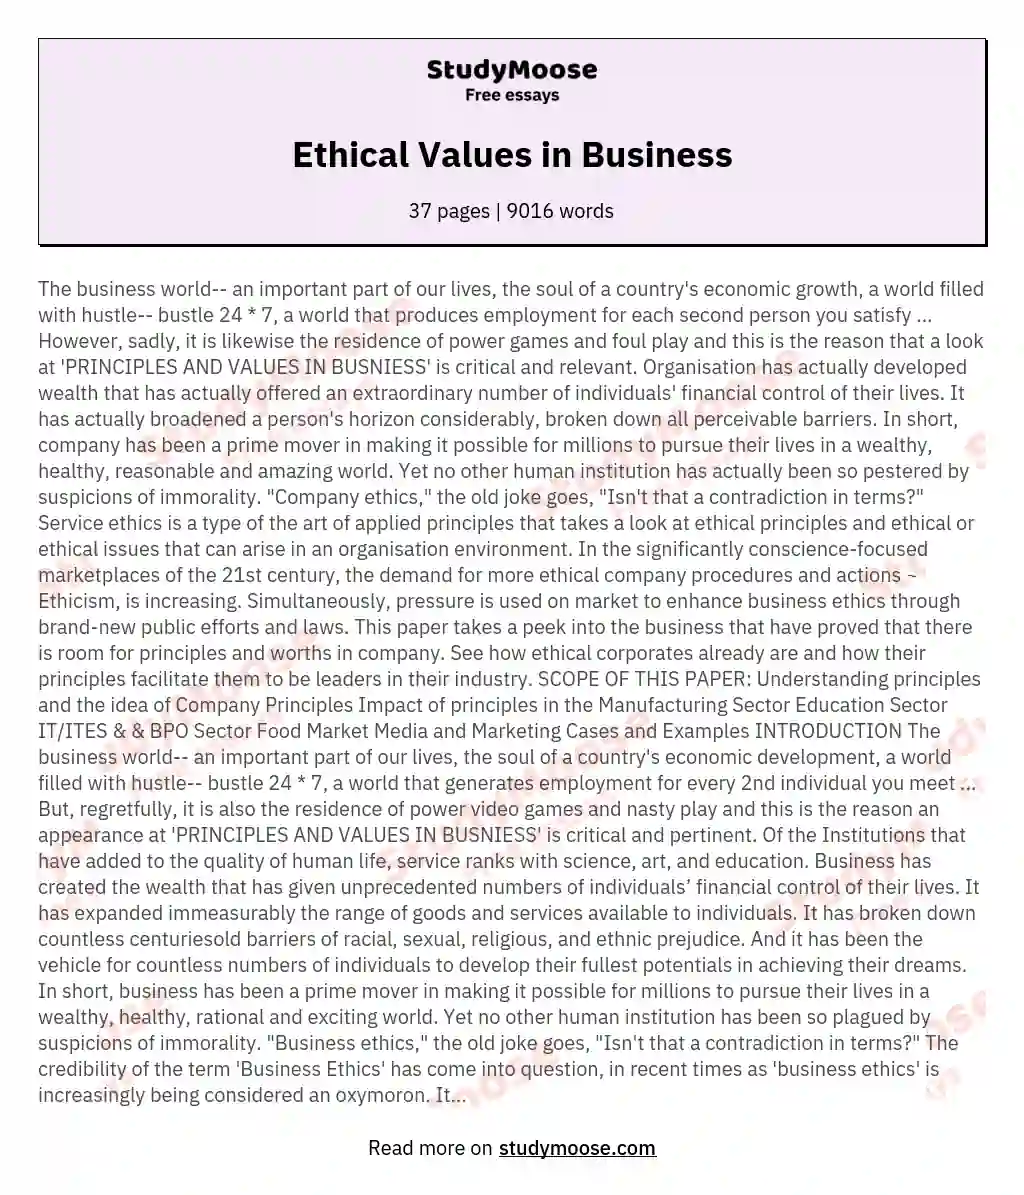 my ethical values essay